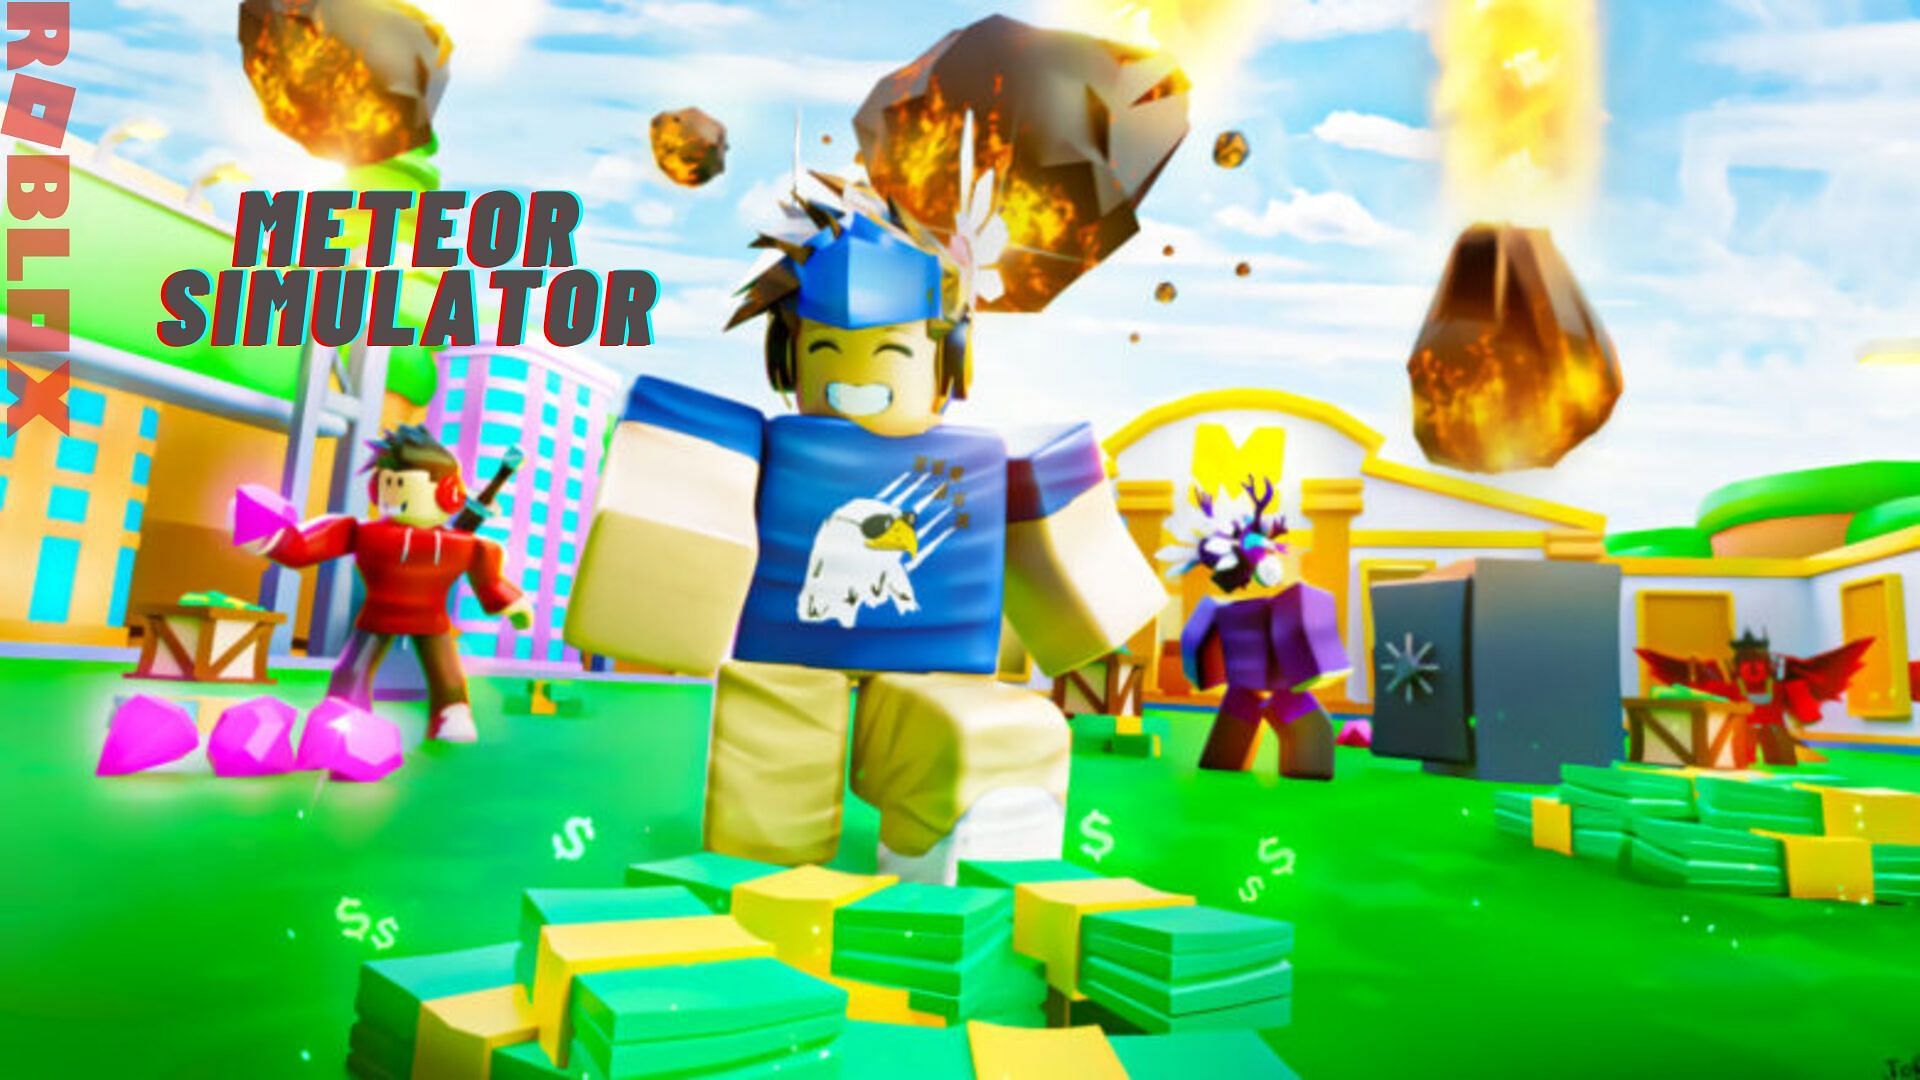 roblox-meteor-simulator-codes-july-2022-free-cash-boost-pets-and-more